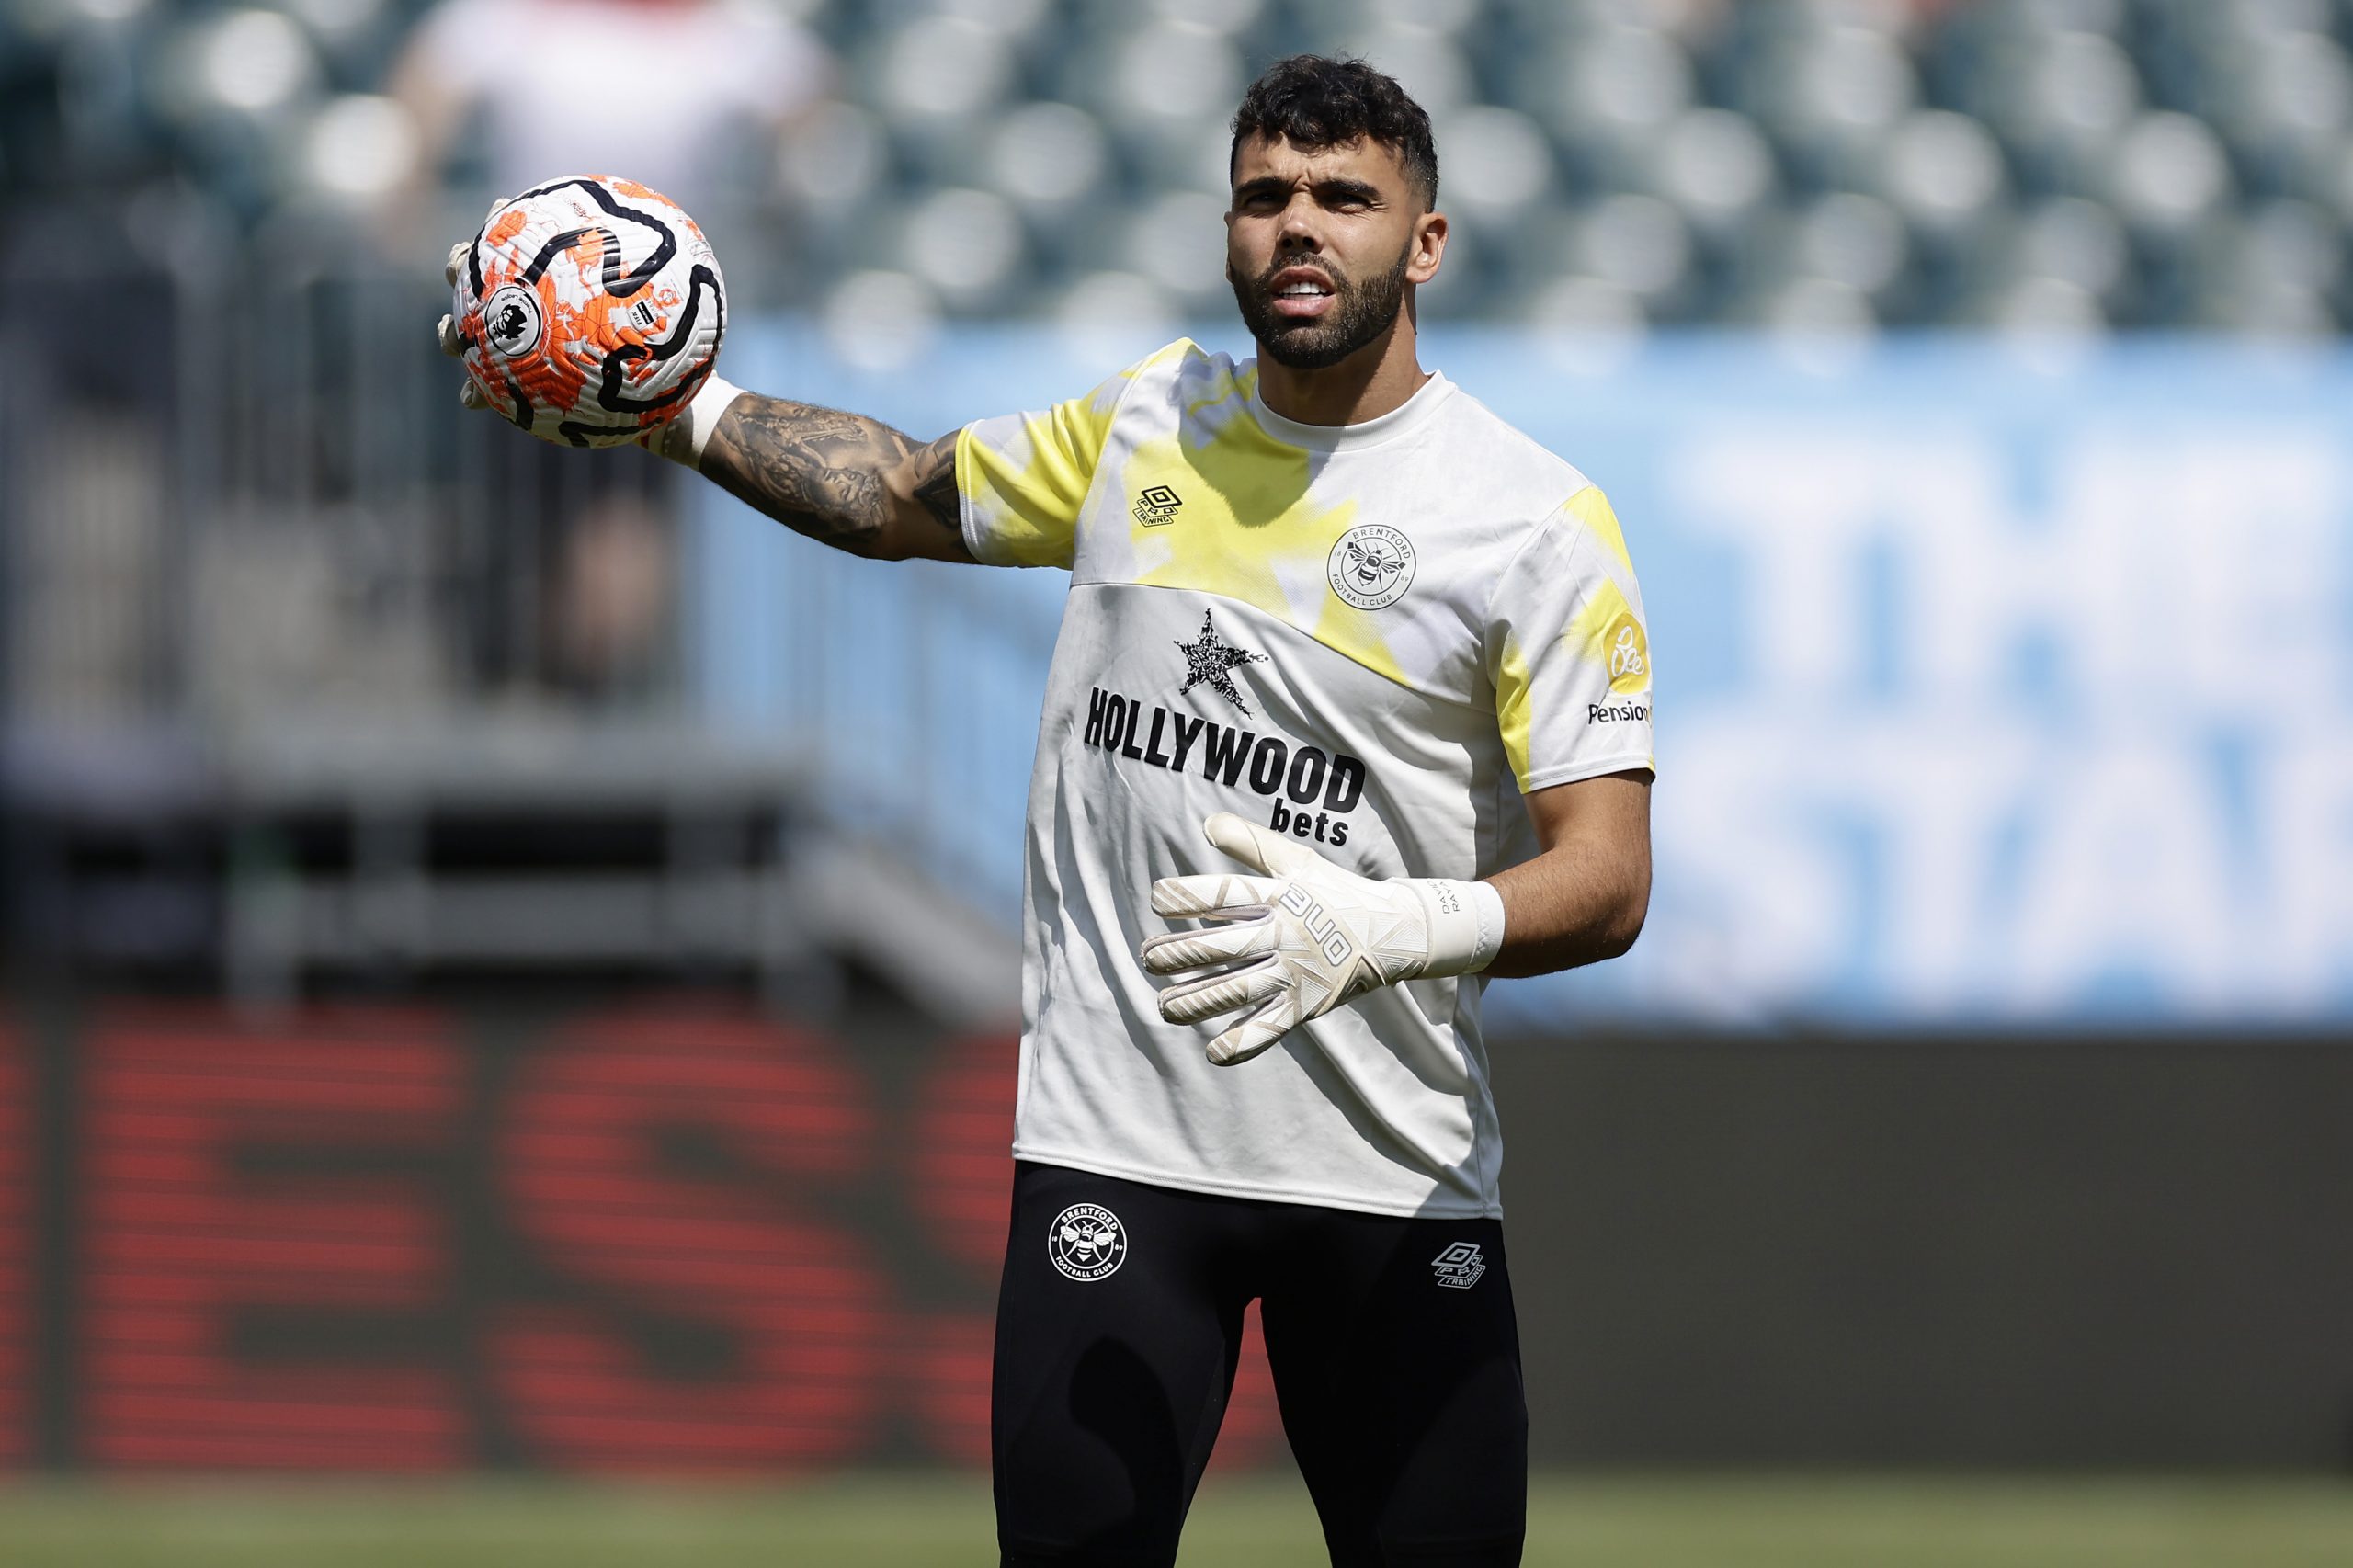 PHILADELPHIA, PENNSYLVANIA - JULY 23: David Raya #1 of Brentford FC warms-up prior to a Premier League Summer Series match between Brentford FC and Fulham FC at Lincoln Financial Field on July 23, 2023 in Philadelphia, Pennsylvania. (Photo by Adam Hunger/Getty Images)